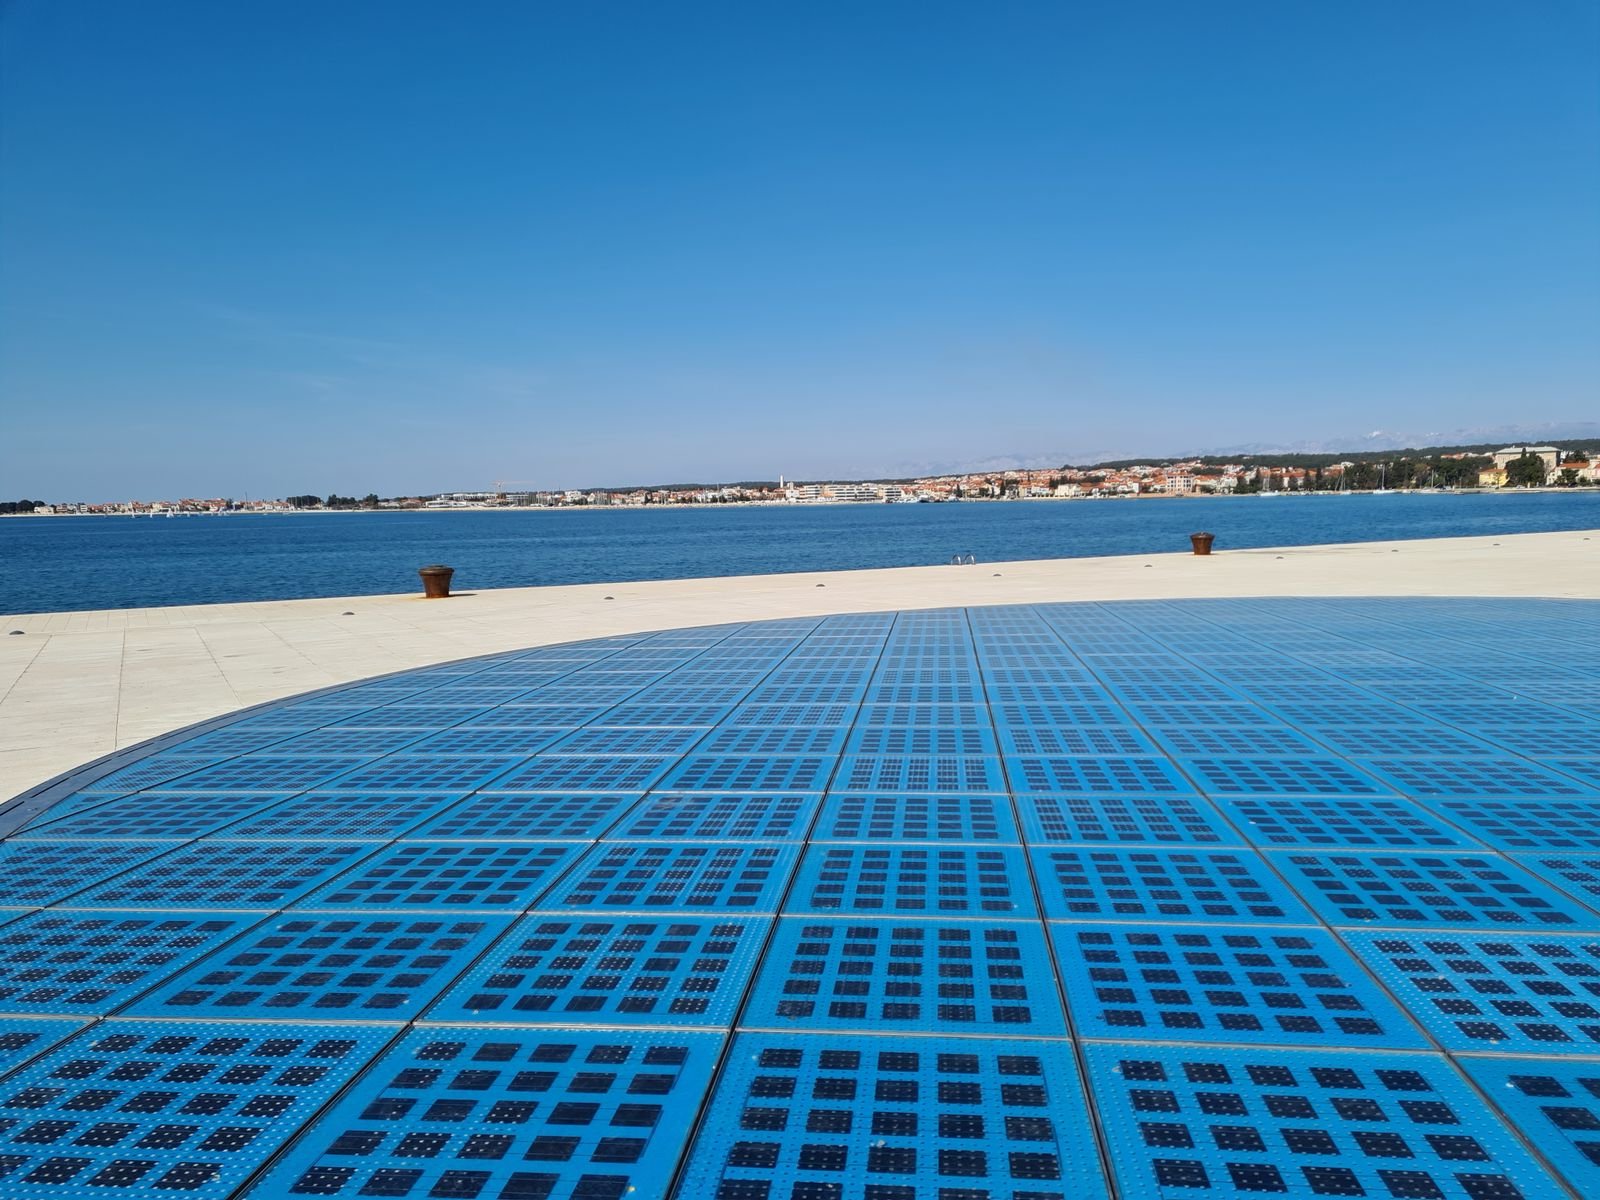 A large blue circular solar panel that is walkable near in the middle of a stone boardwalk along the water